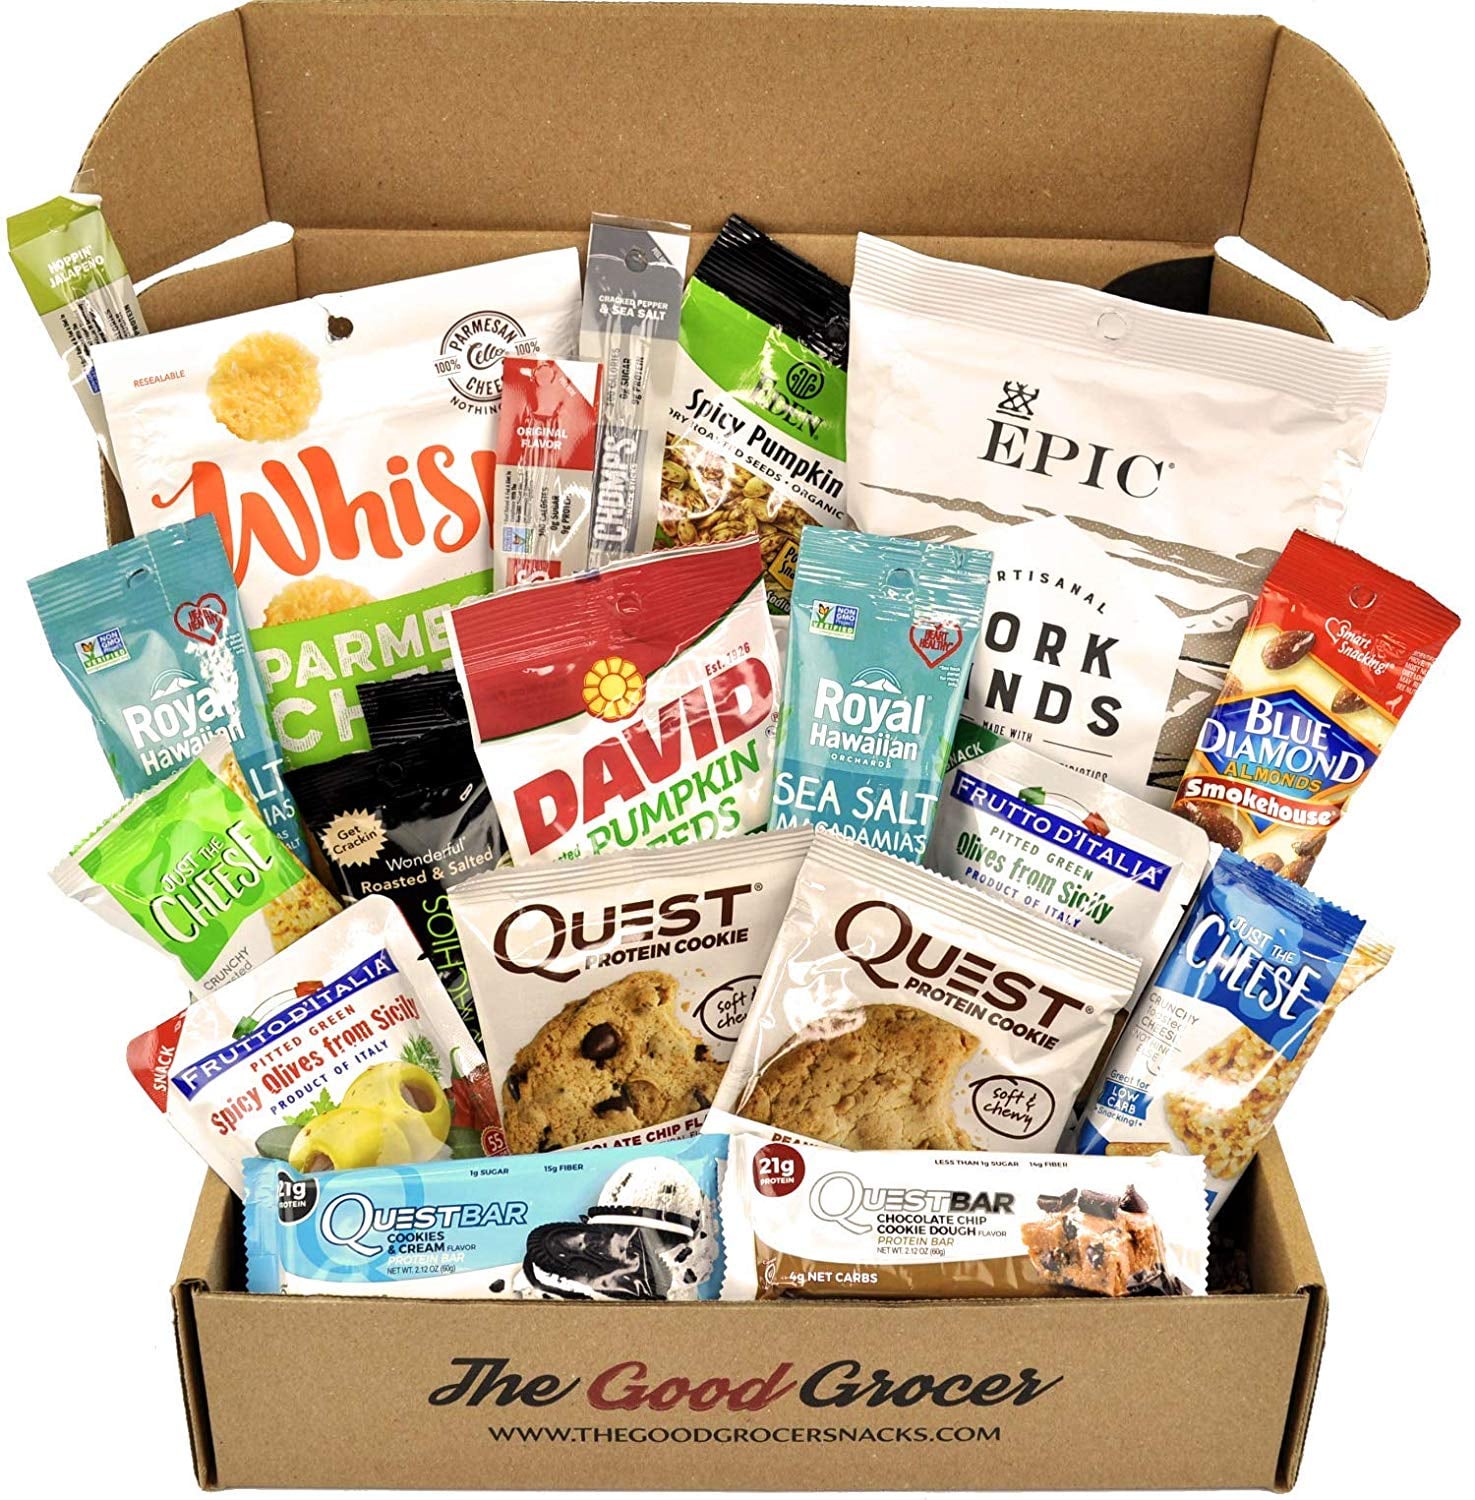 Keto Sweets Snack Box and Care Package